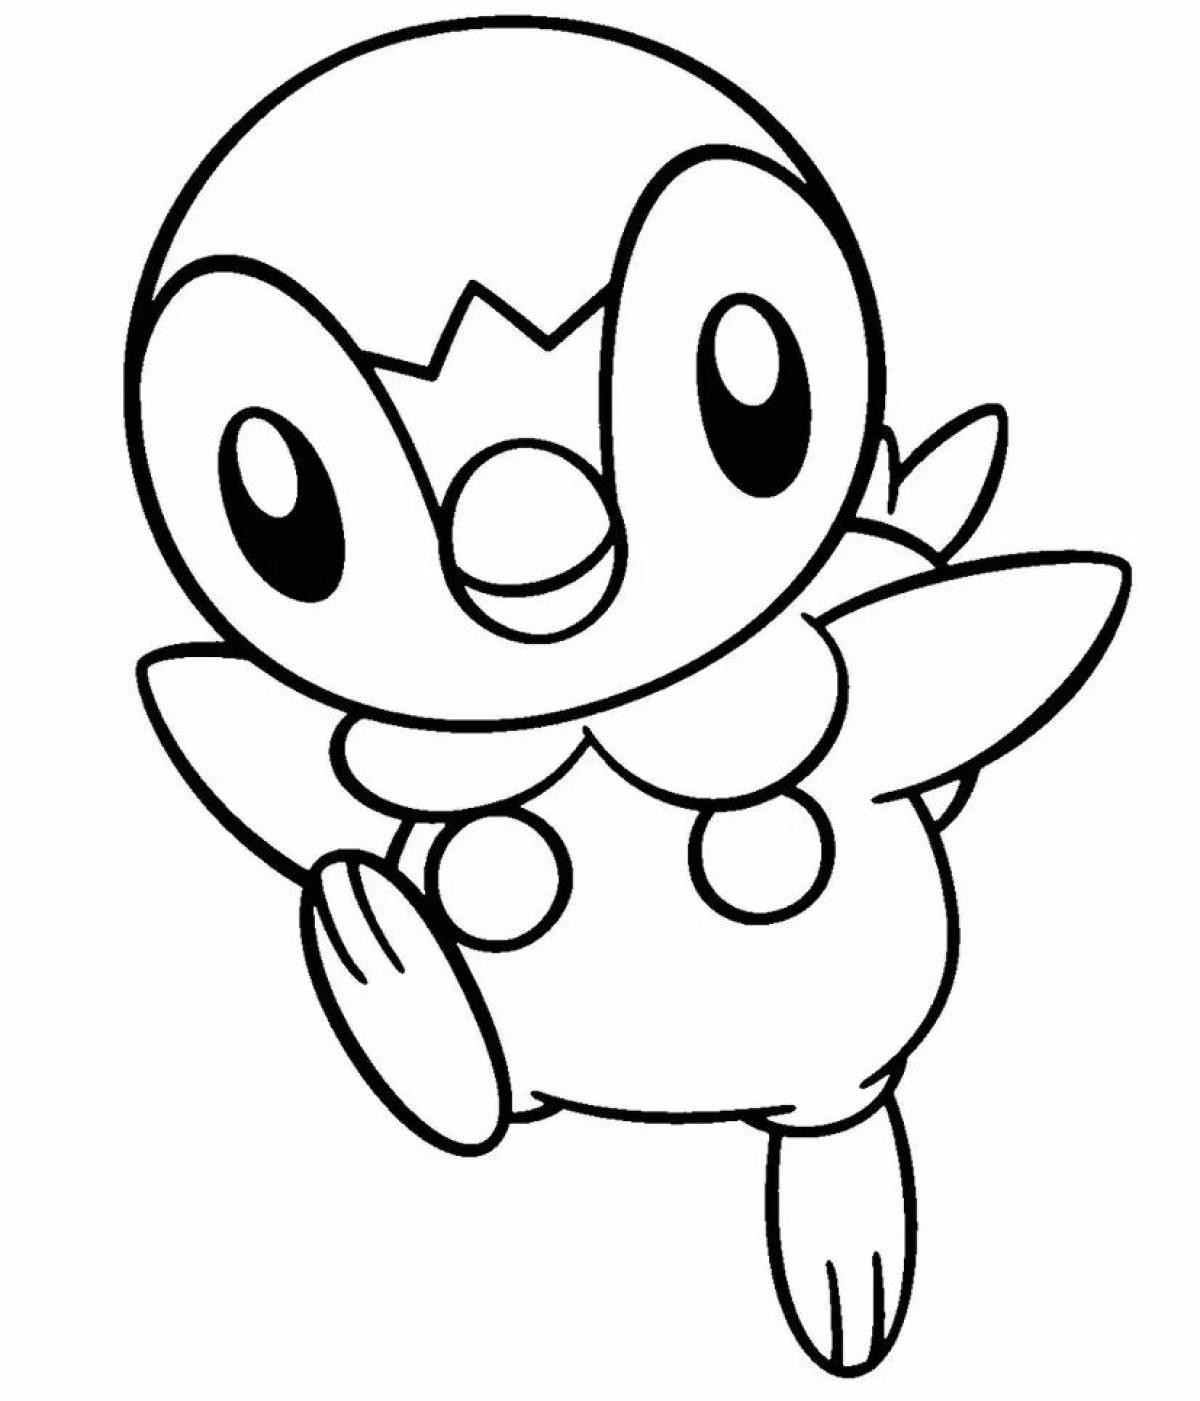 Colouring cool piplup pokemon